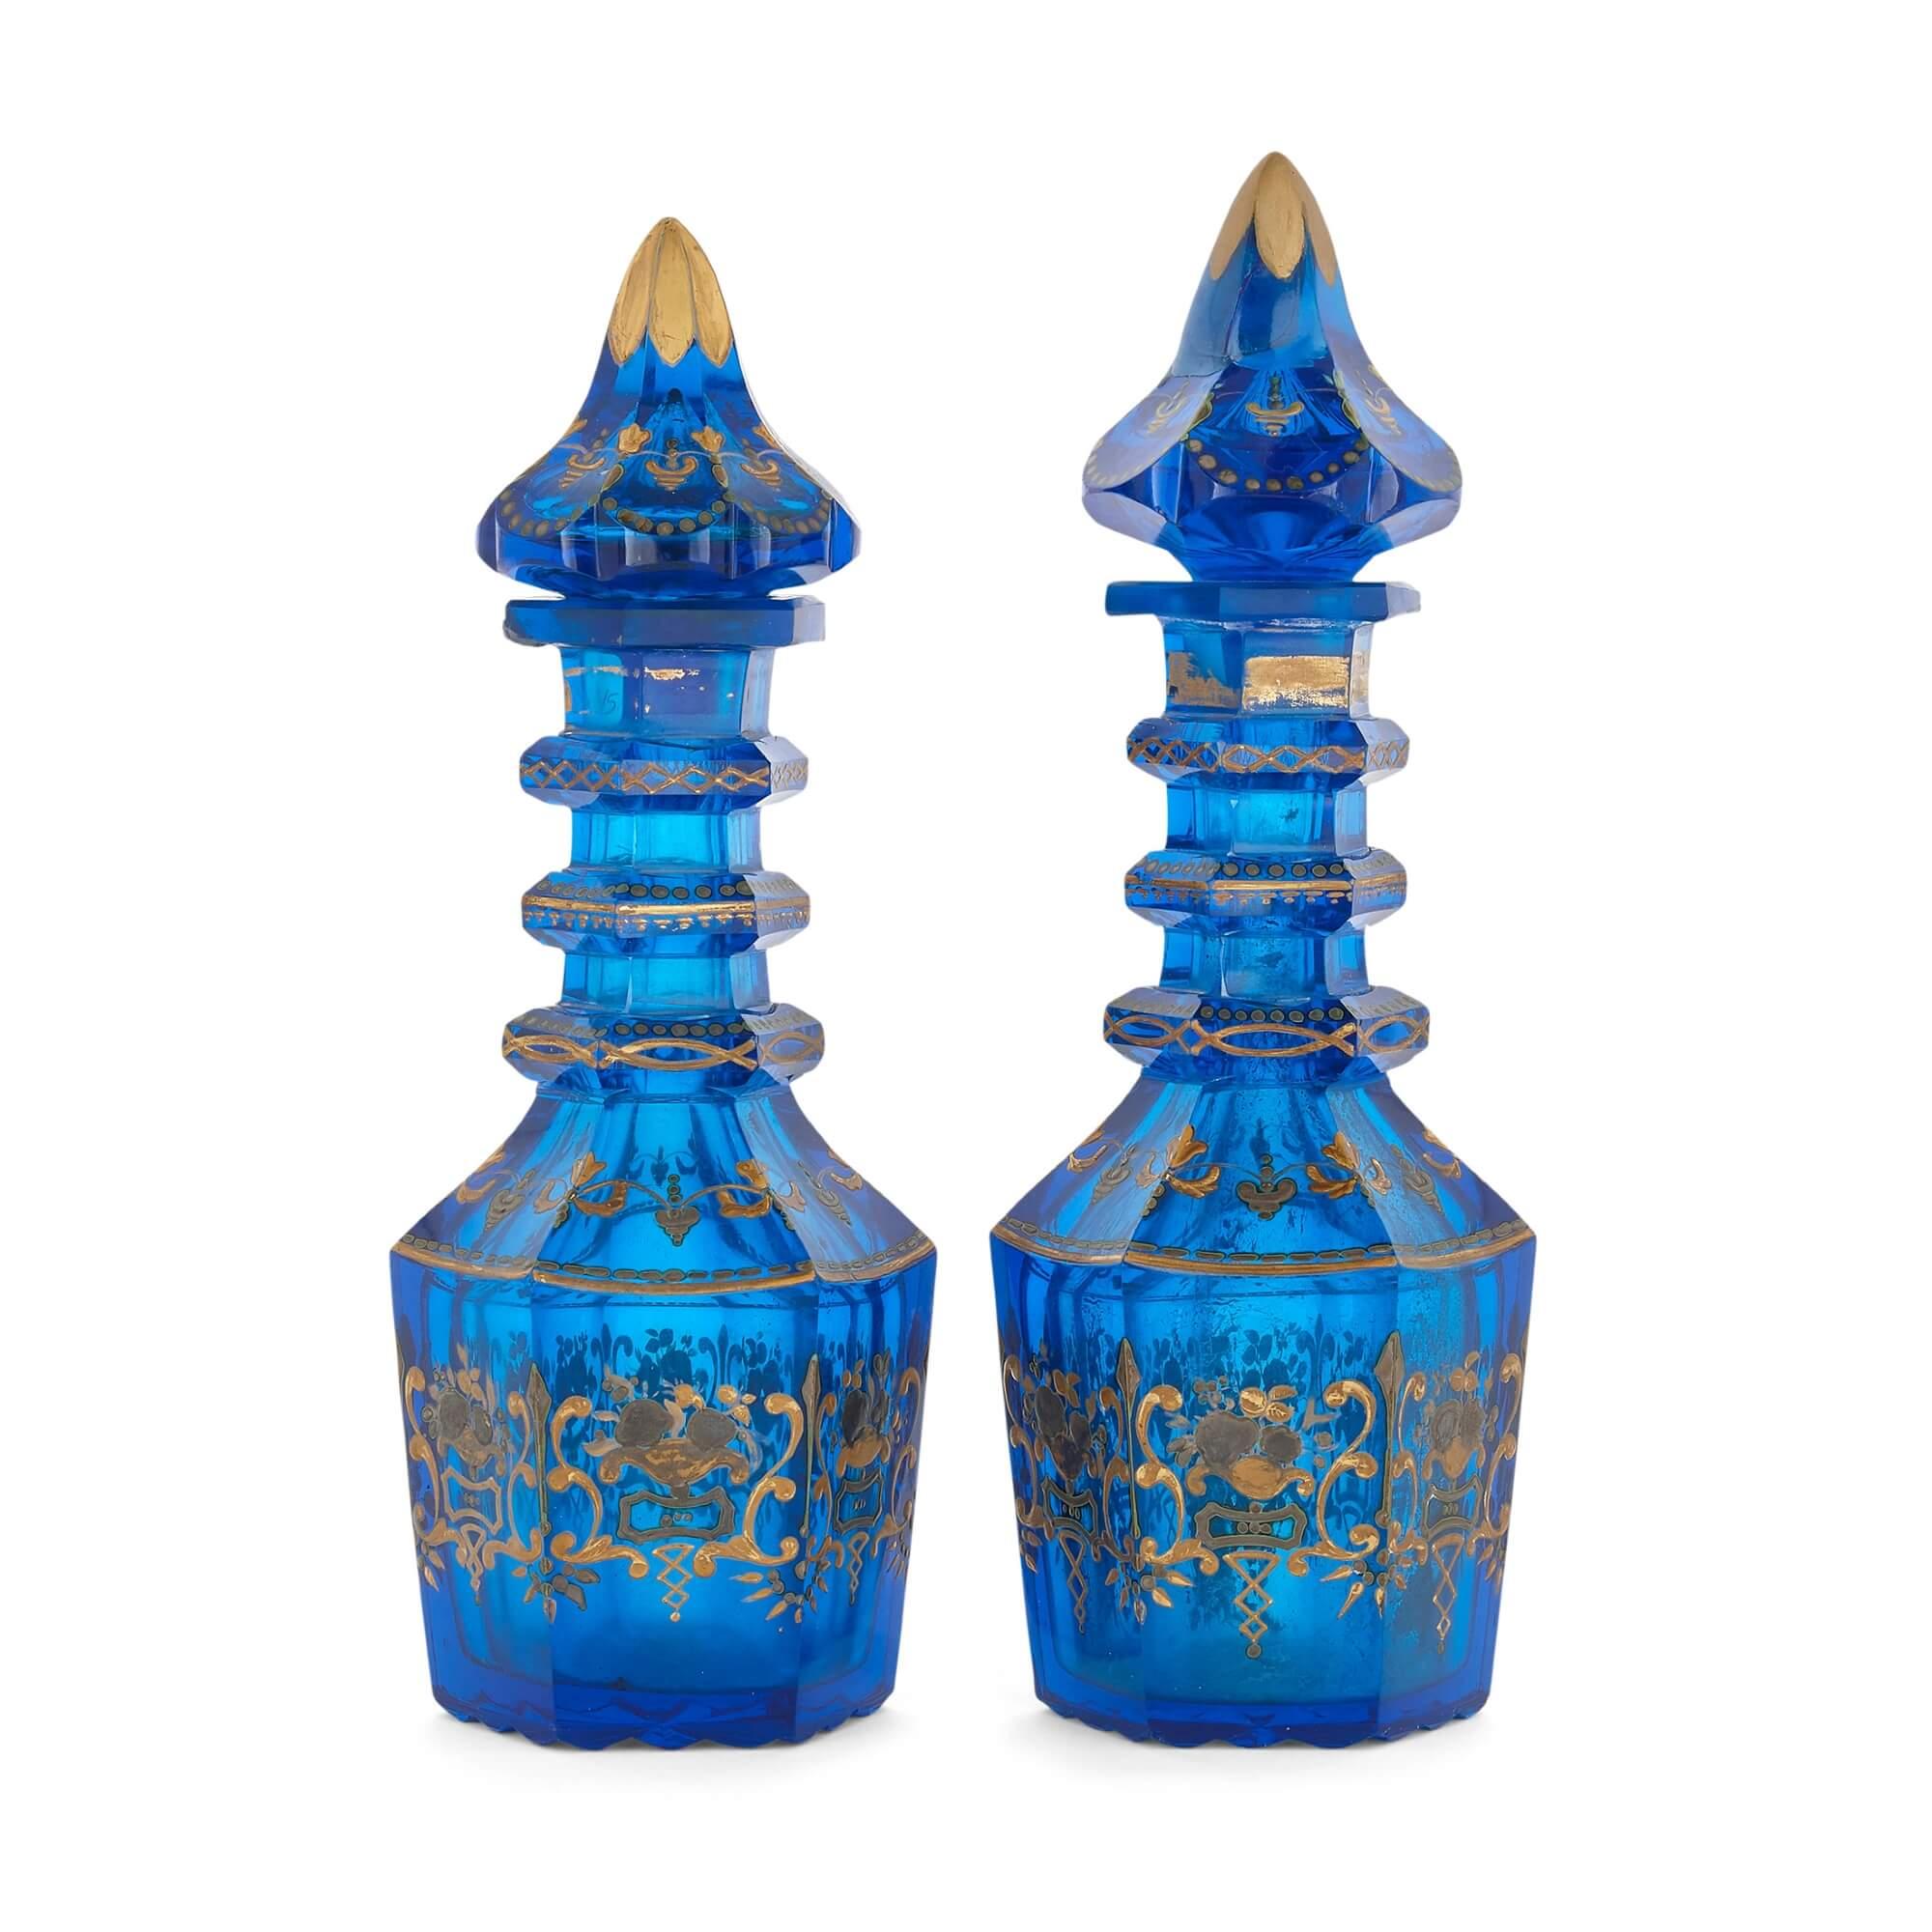 Pair of 19th Century parcel gilt Bohemian glass decanters
Bohemian, 19th Century
Height 27cm, diameter 8.5cm

This fine pair of decanters are crafted in royal blue Bohemian glass, and feature hexagonal baluster form bodies which lead upwards to